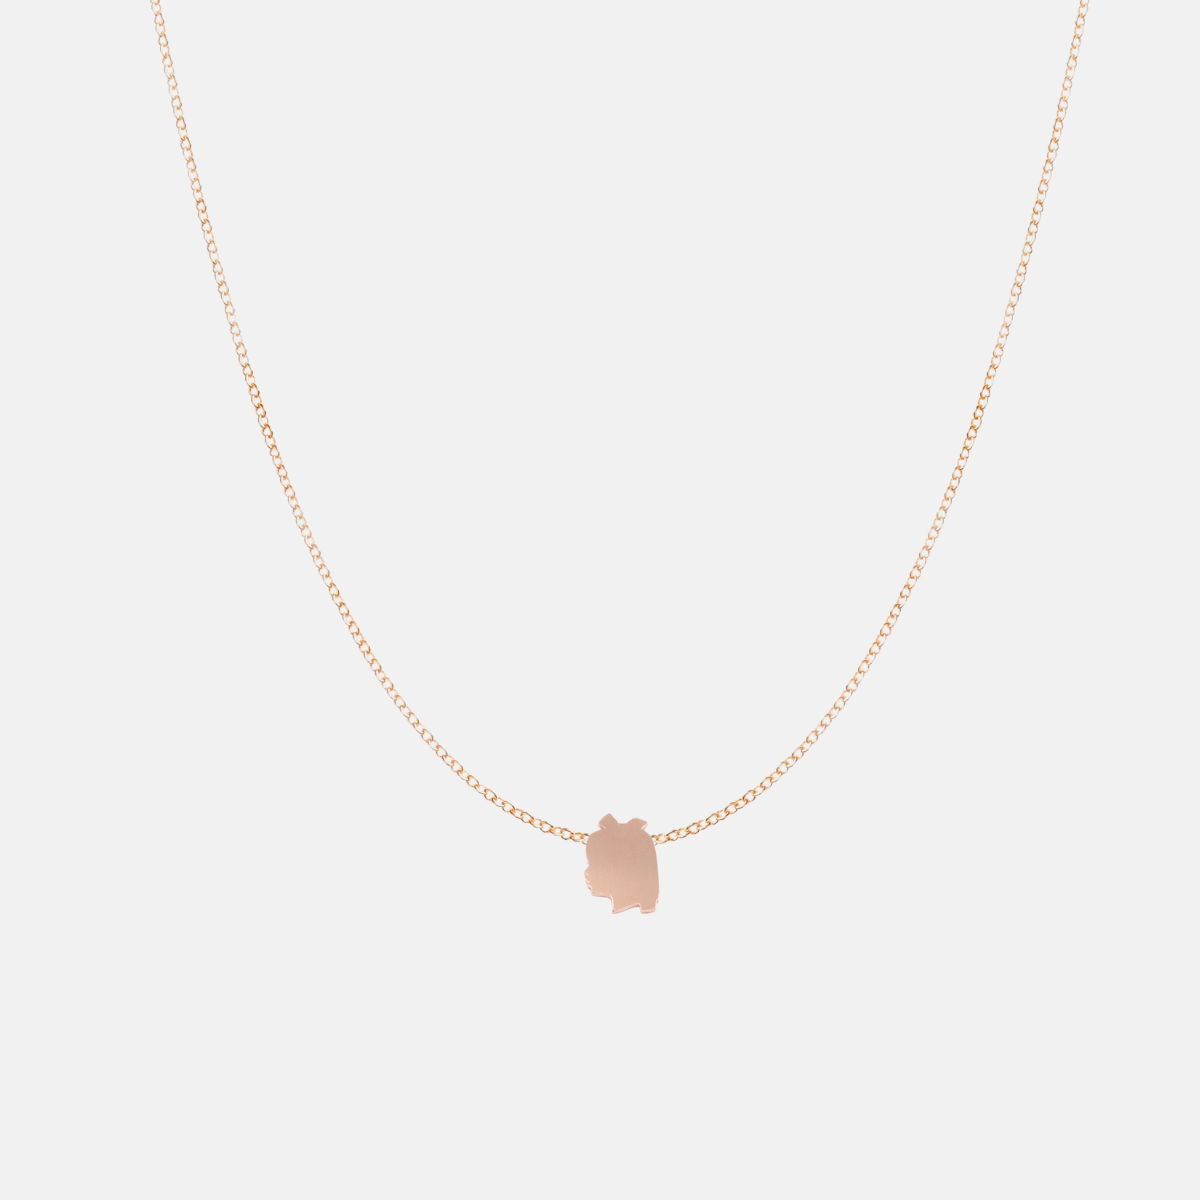 Fixed Silhouette Charm Necklace